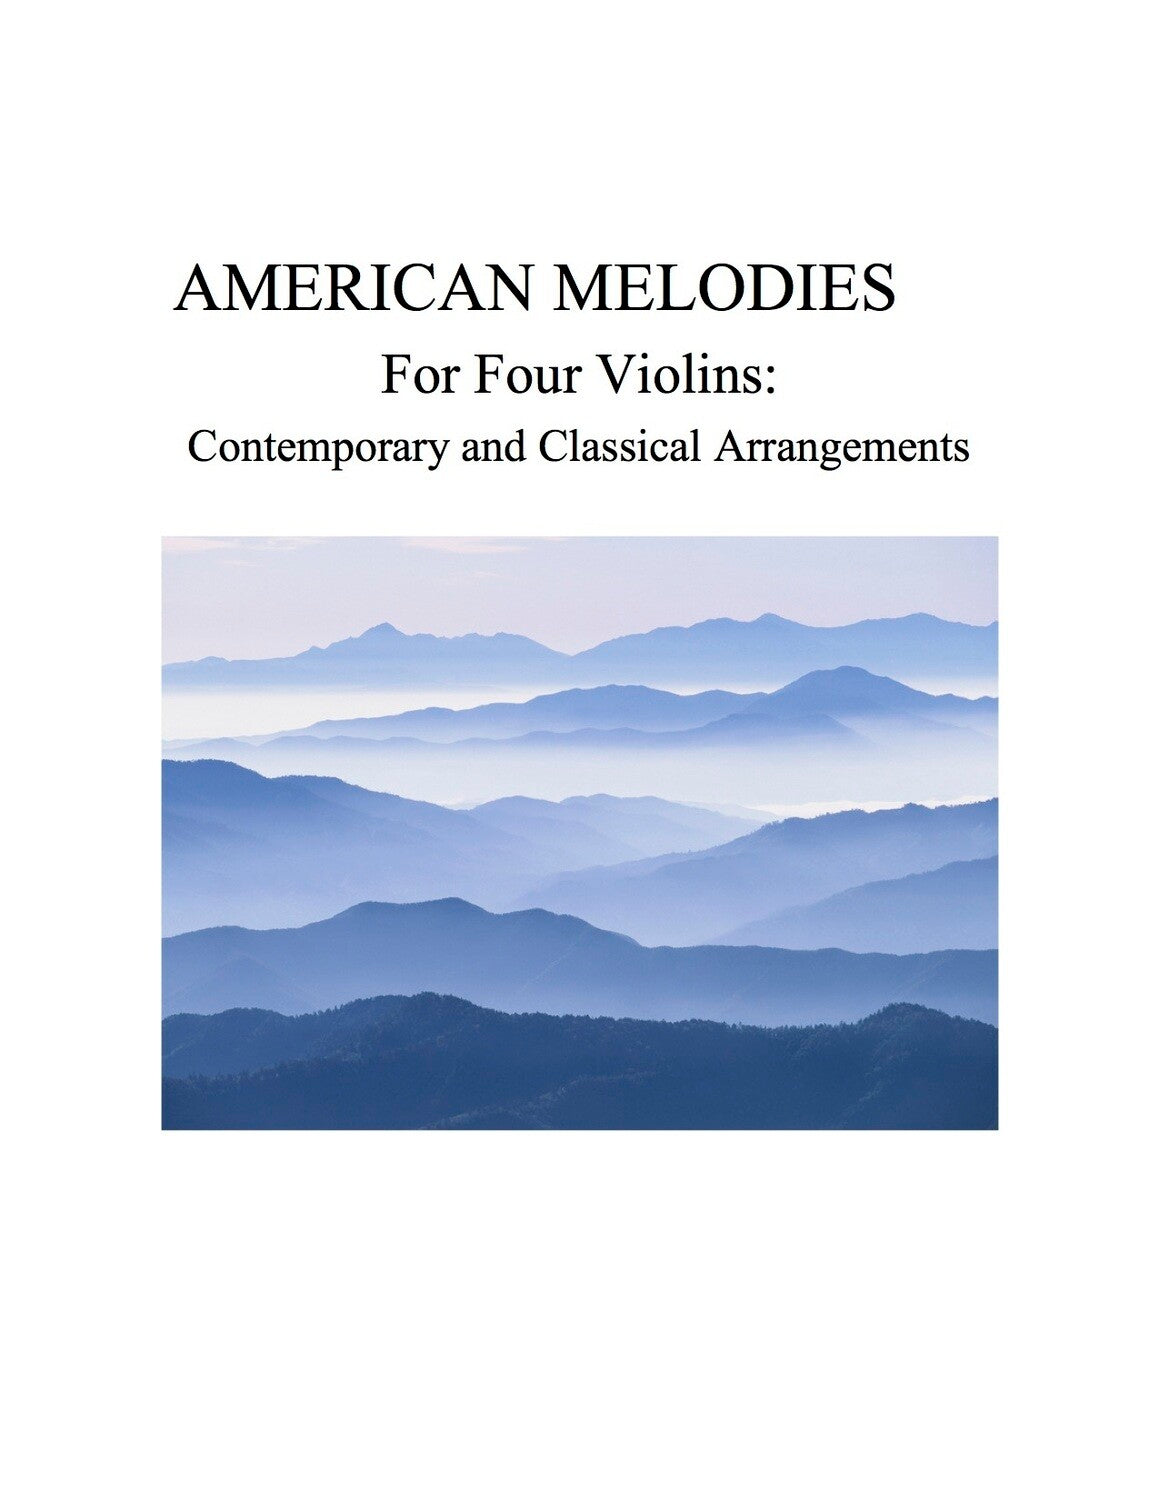 064 -  American Melodies For Four Violins and Cell Phone Symphony